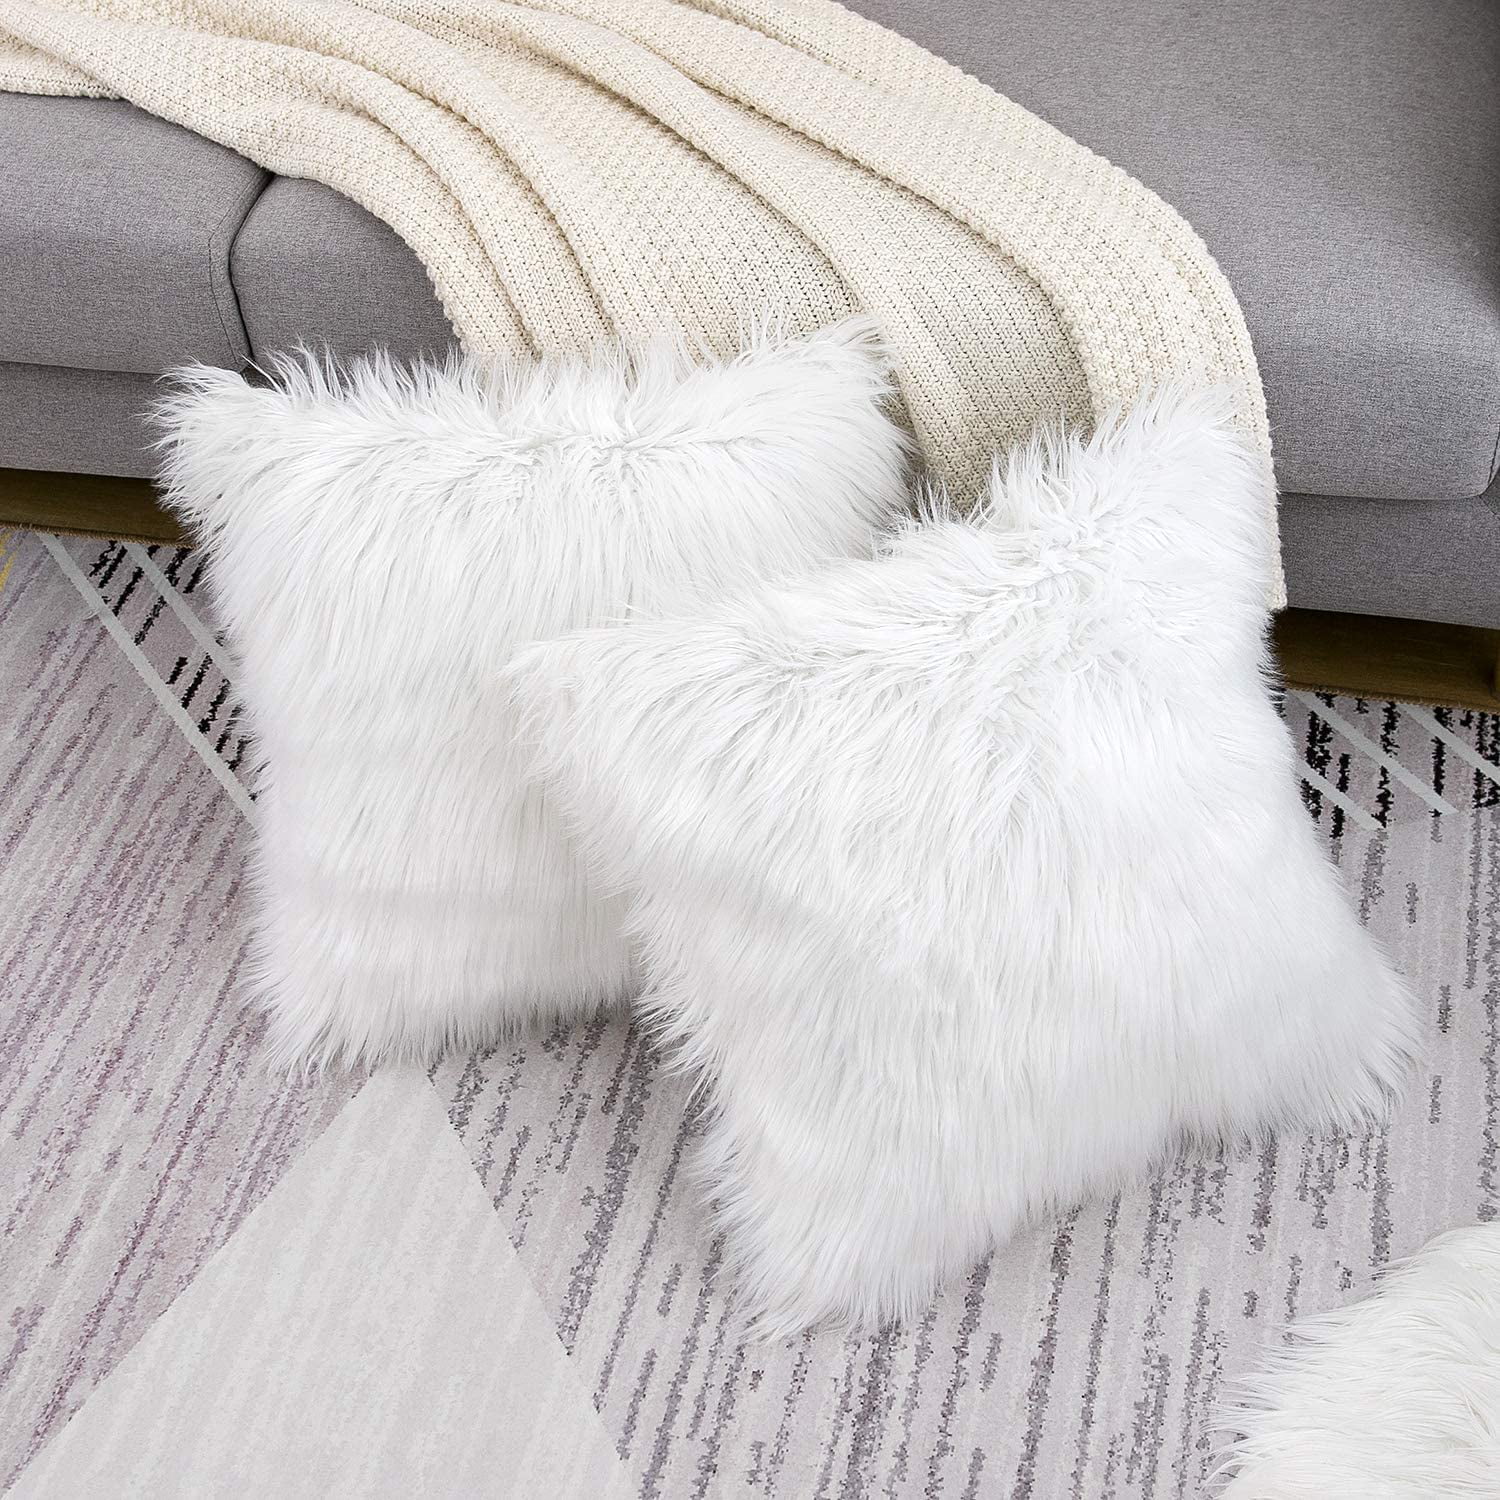 Snuggle Sac Luxury Faux Fur Throw Pillow Covers 18x18 Set of 2 for Fall  Decorative Super Soft Fluffy Aesthetic Marble Textured Square Cojines for